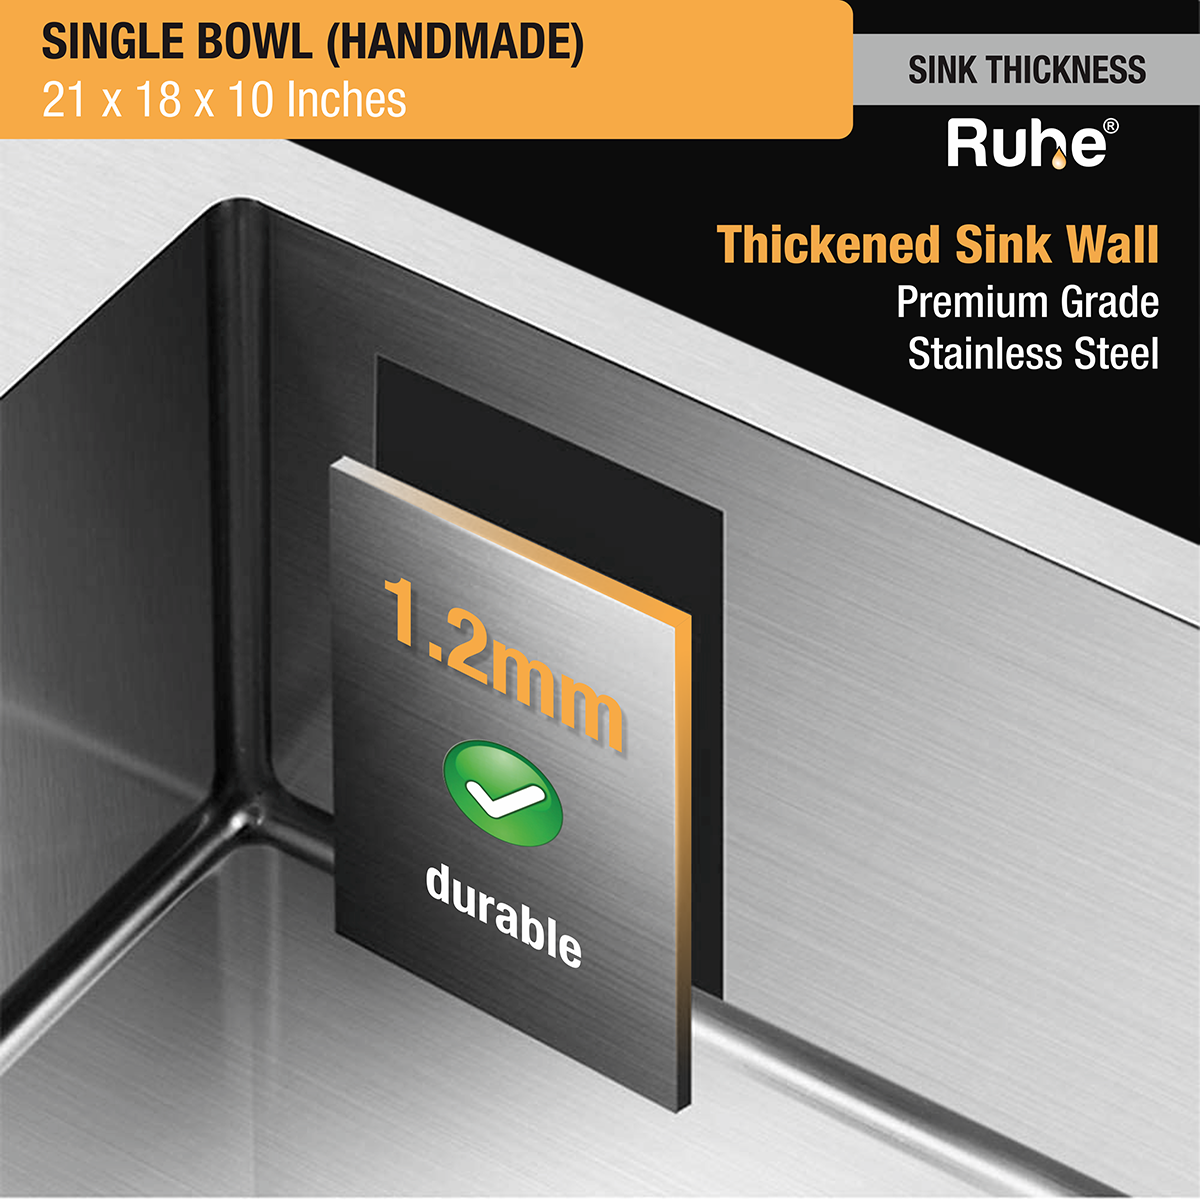 Handmade Single Bowl Premium Stainless Steel Kitchen Sink (21 x 18 x 10 Inches) 1.2 mm thickness